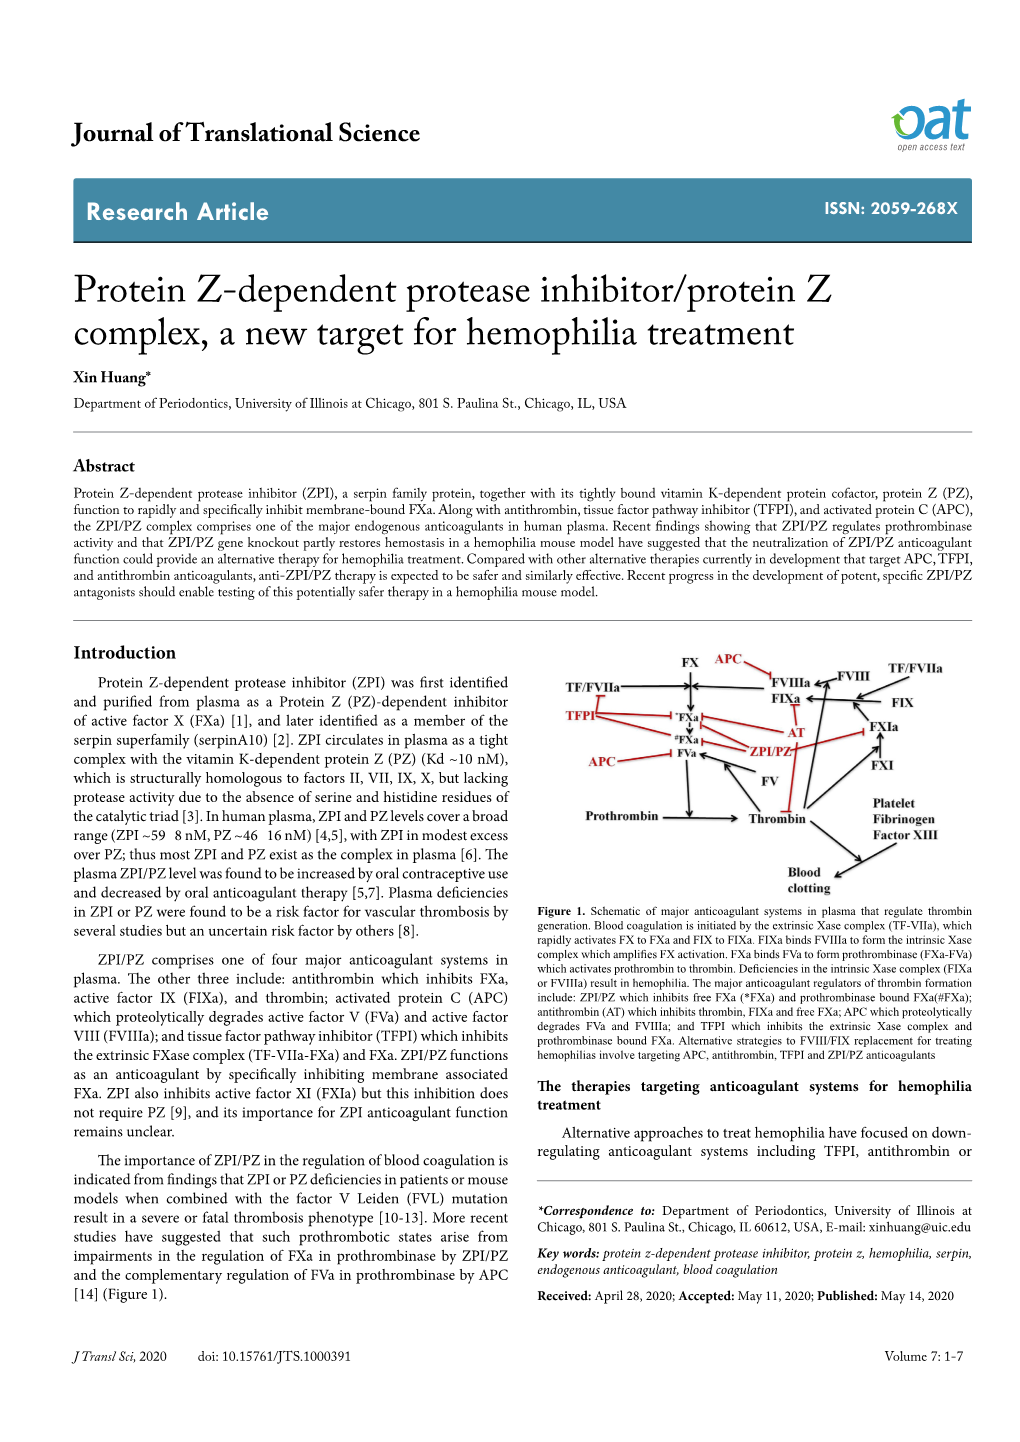 Protein Z-Dependent Protease Inhibitor/Protein Z Complex, a New Target for Hemophilia Treatment